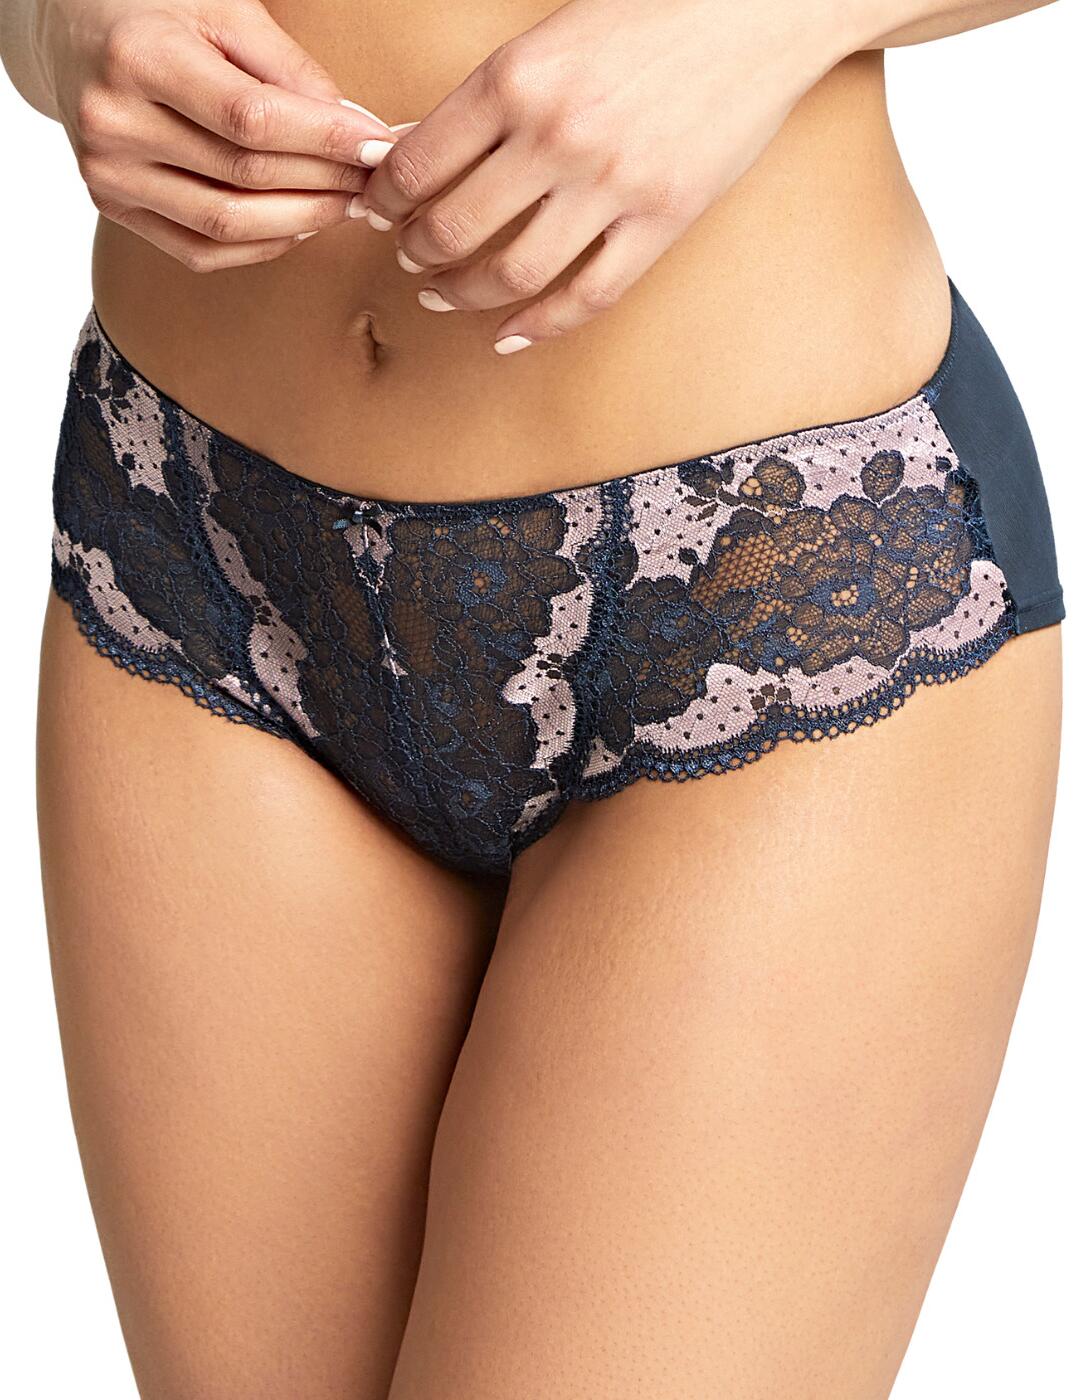 Panache Clara Brief With Free UK Delivery